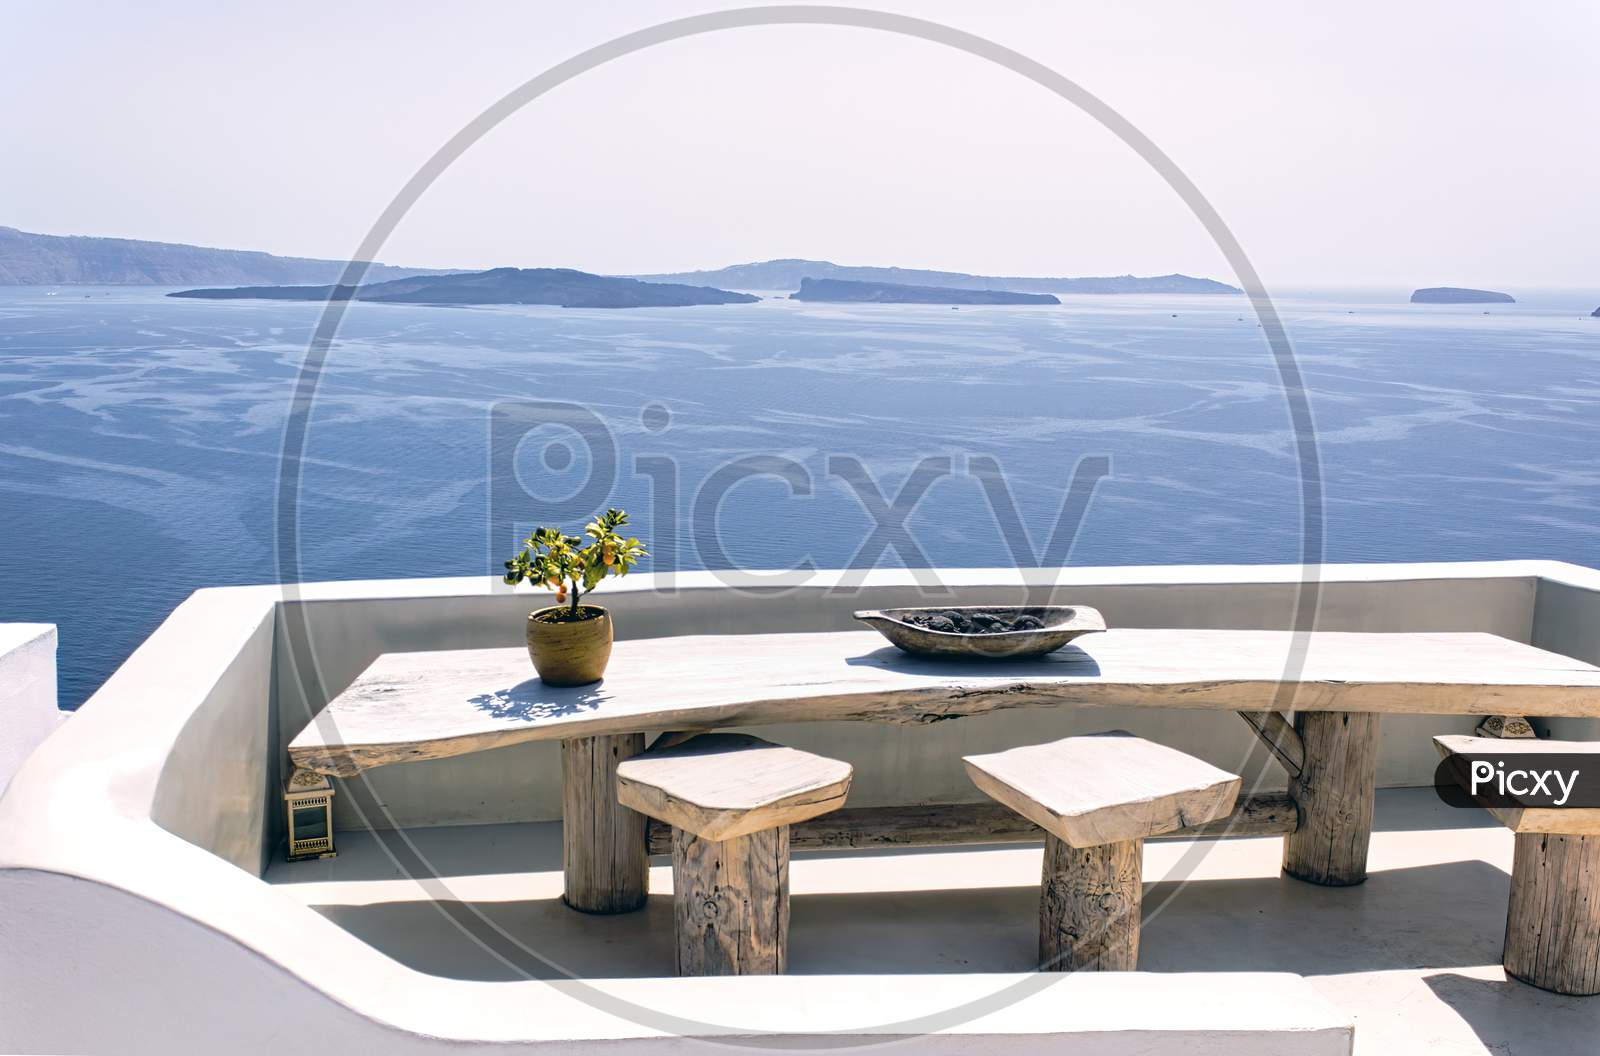 Santorini, Greece: A Pot With Flower Or Plant And A Plate On A Wooden Table With Wooden Chair Against Beautiful Sea Ocean Background With Mountains